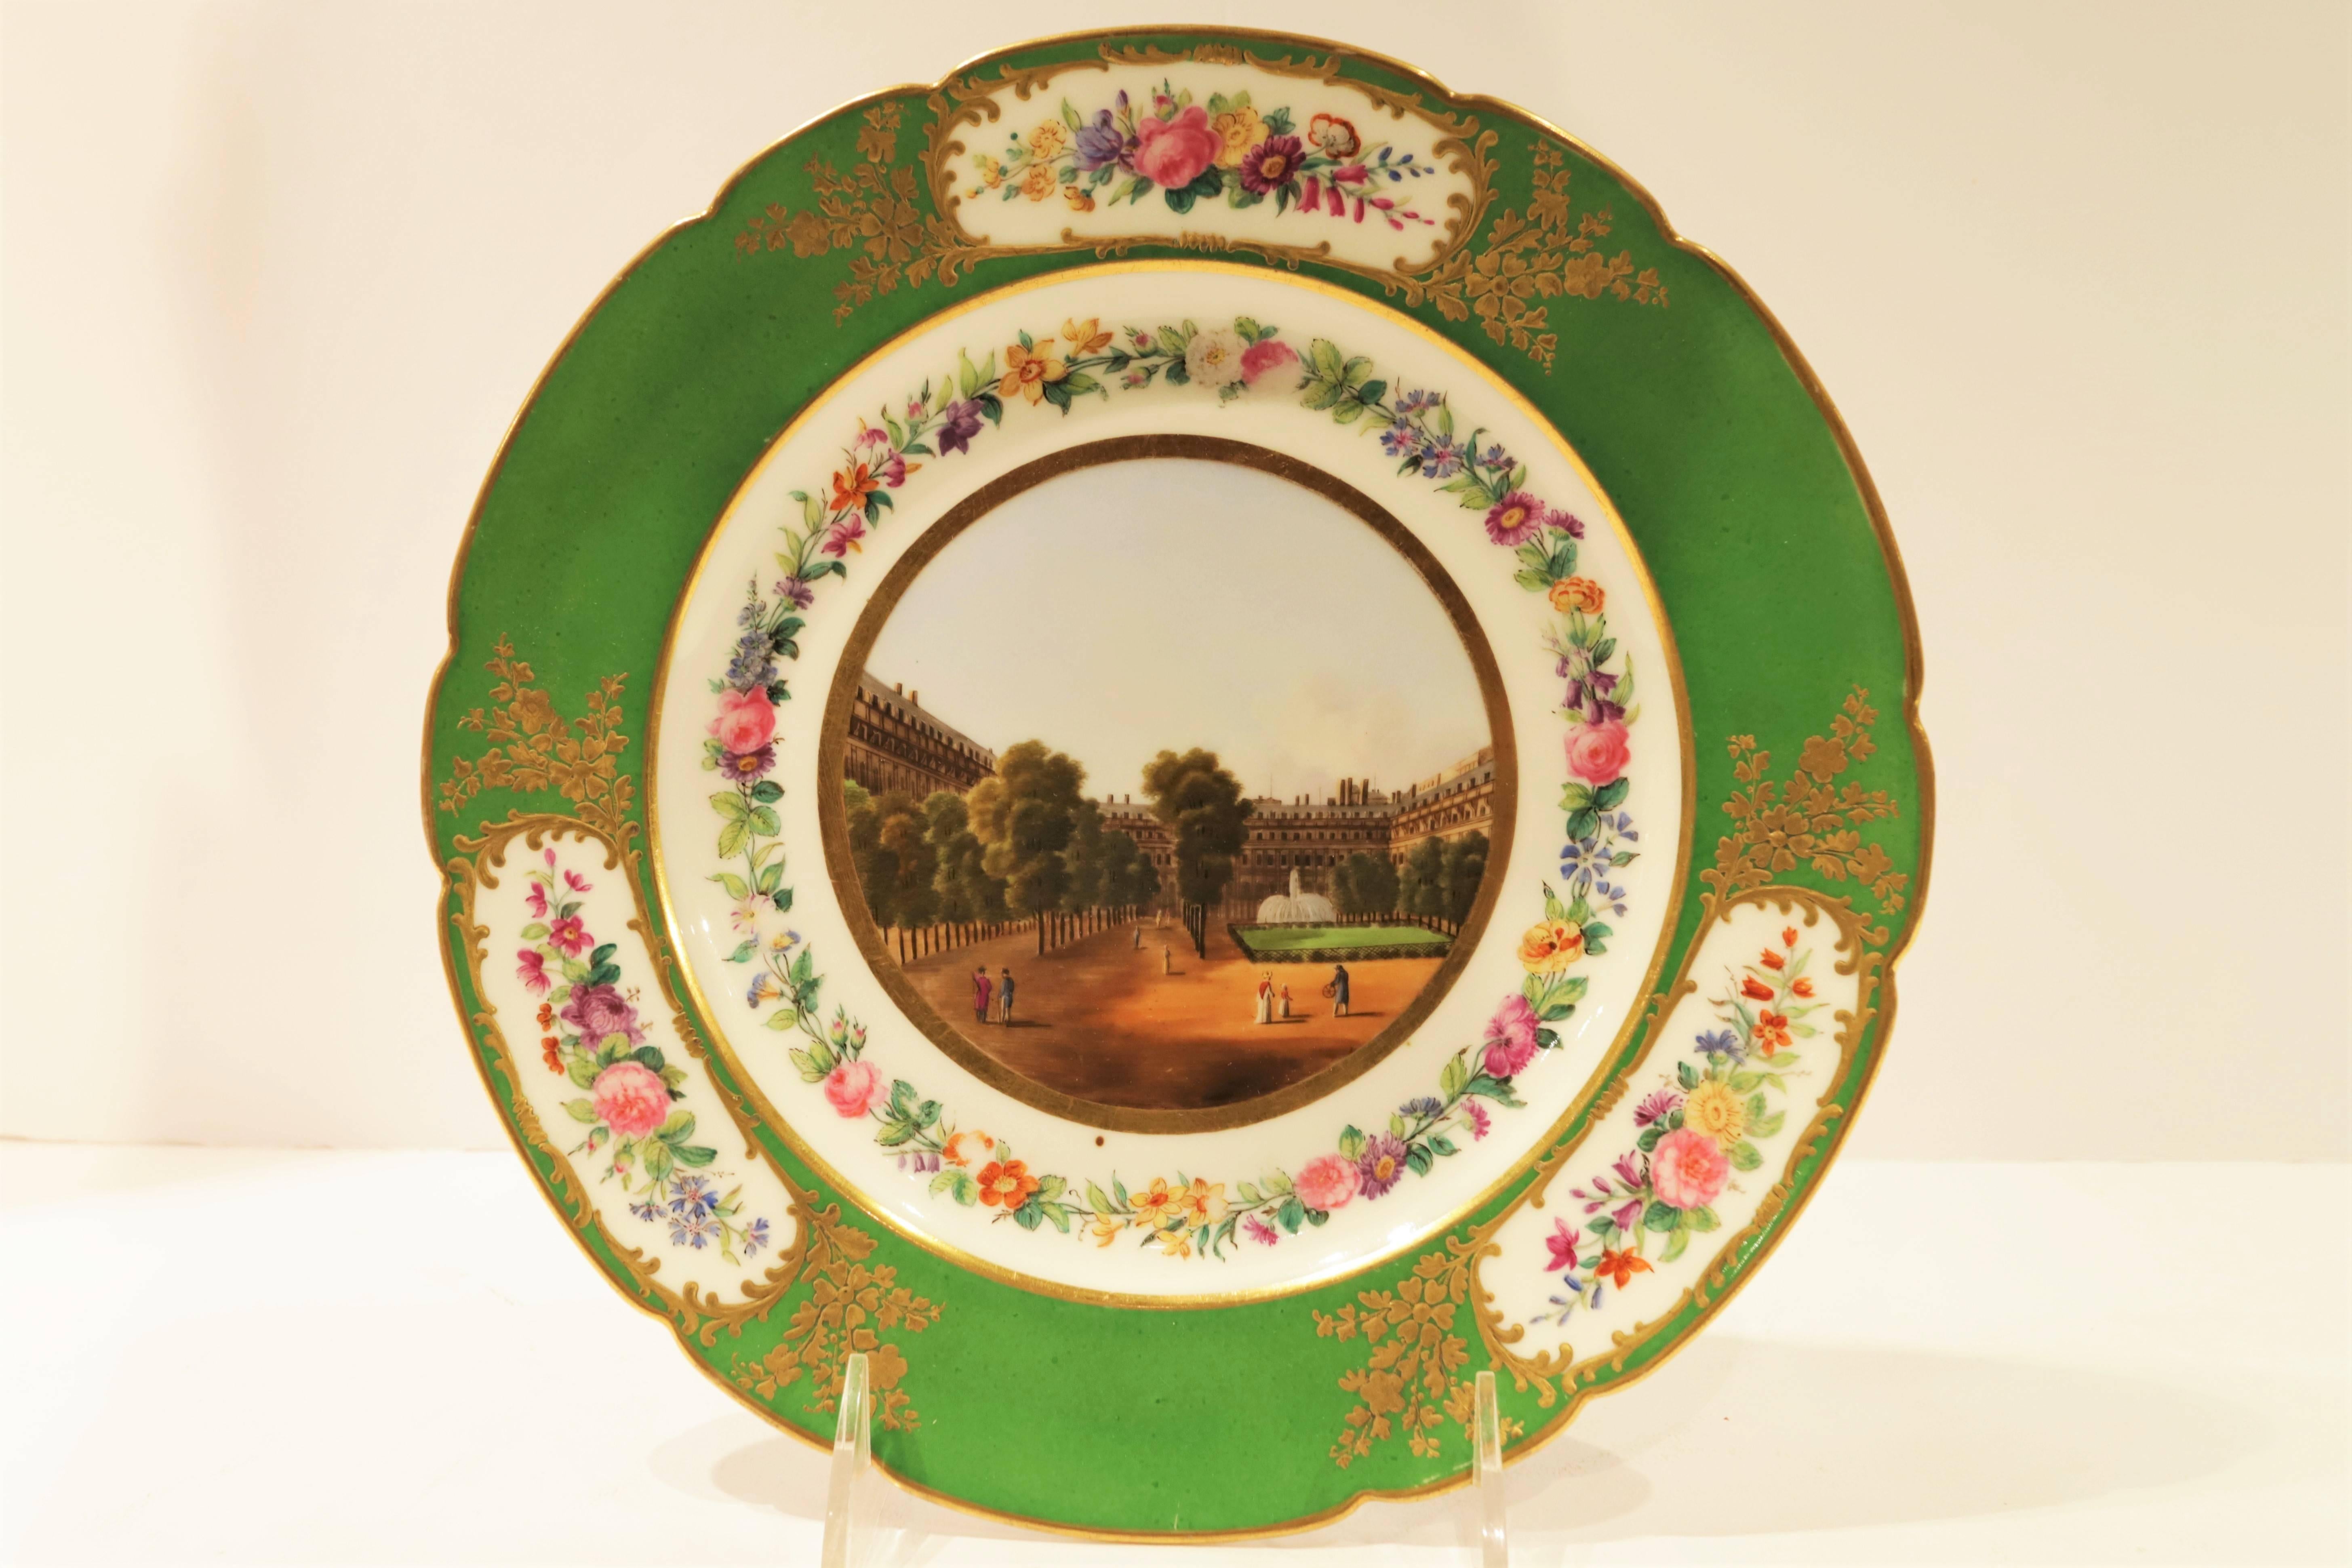 Six 19th century Paris porcelain plates painted with architectural scenes.
Each very finely hand-painted depicting various important historic places in Europe, including Palais Royal in France and the Pantheon in Italy.